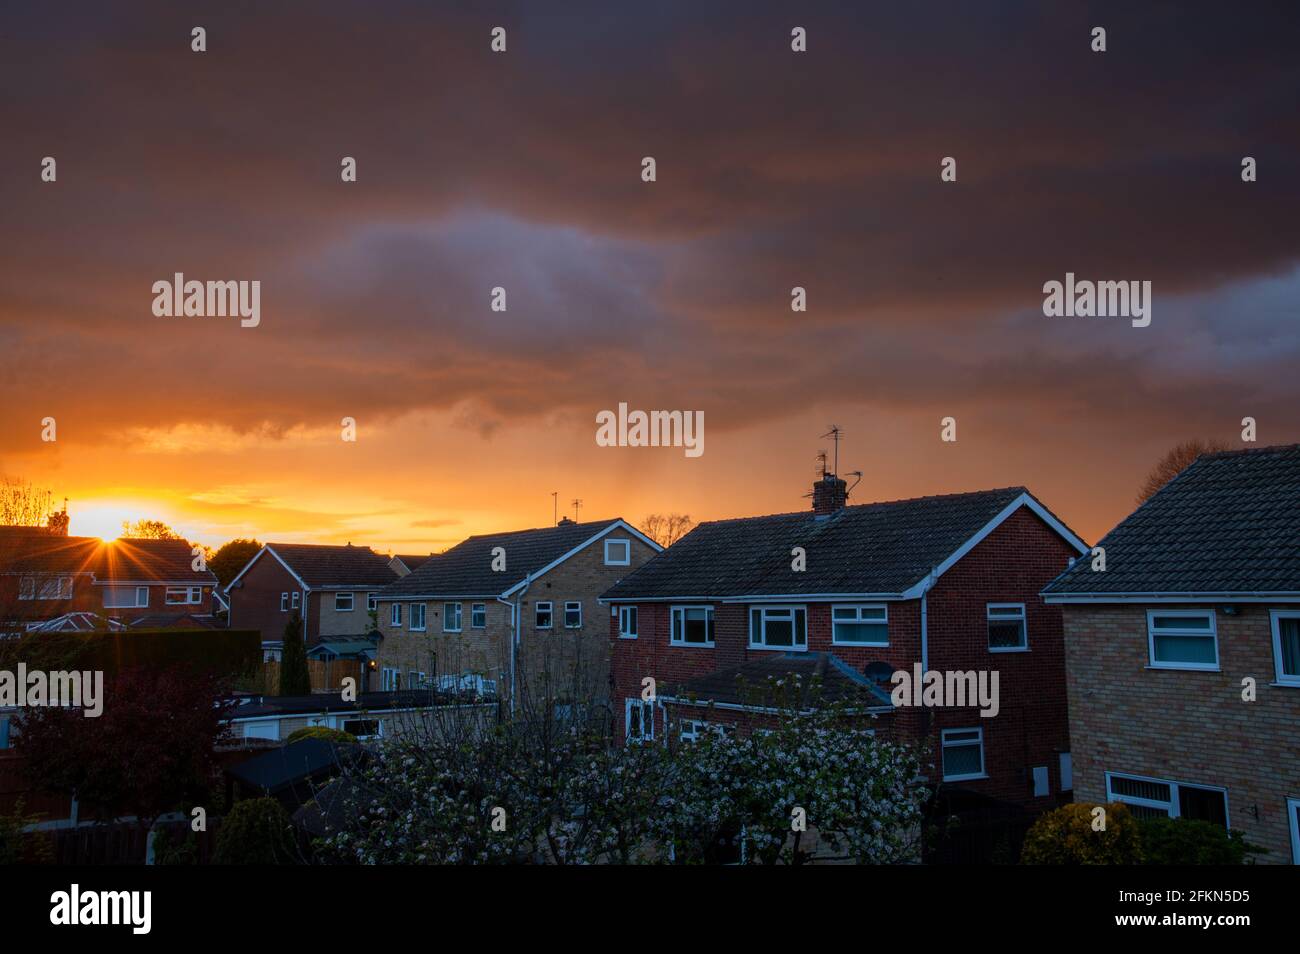 Stormy sunset over a residential area Stock Photo